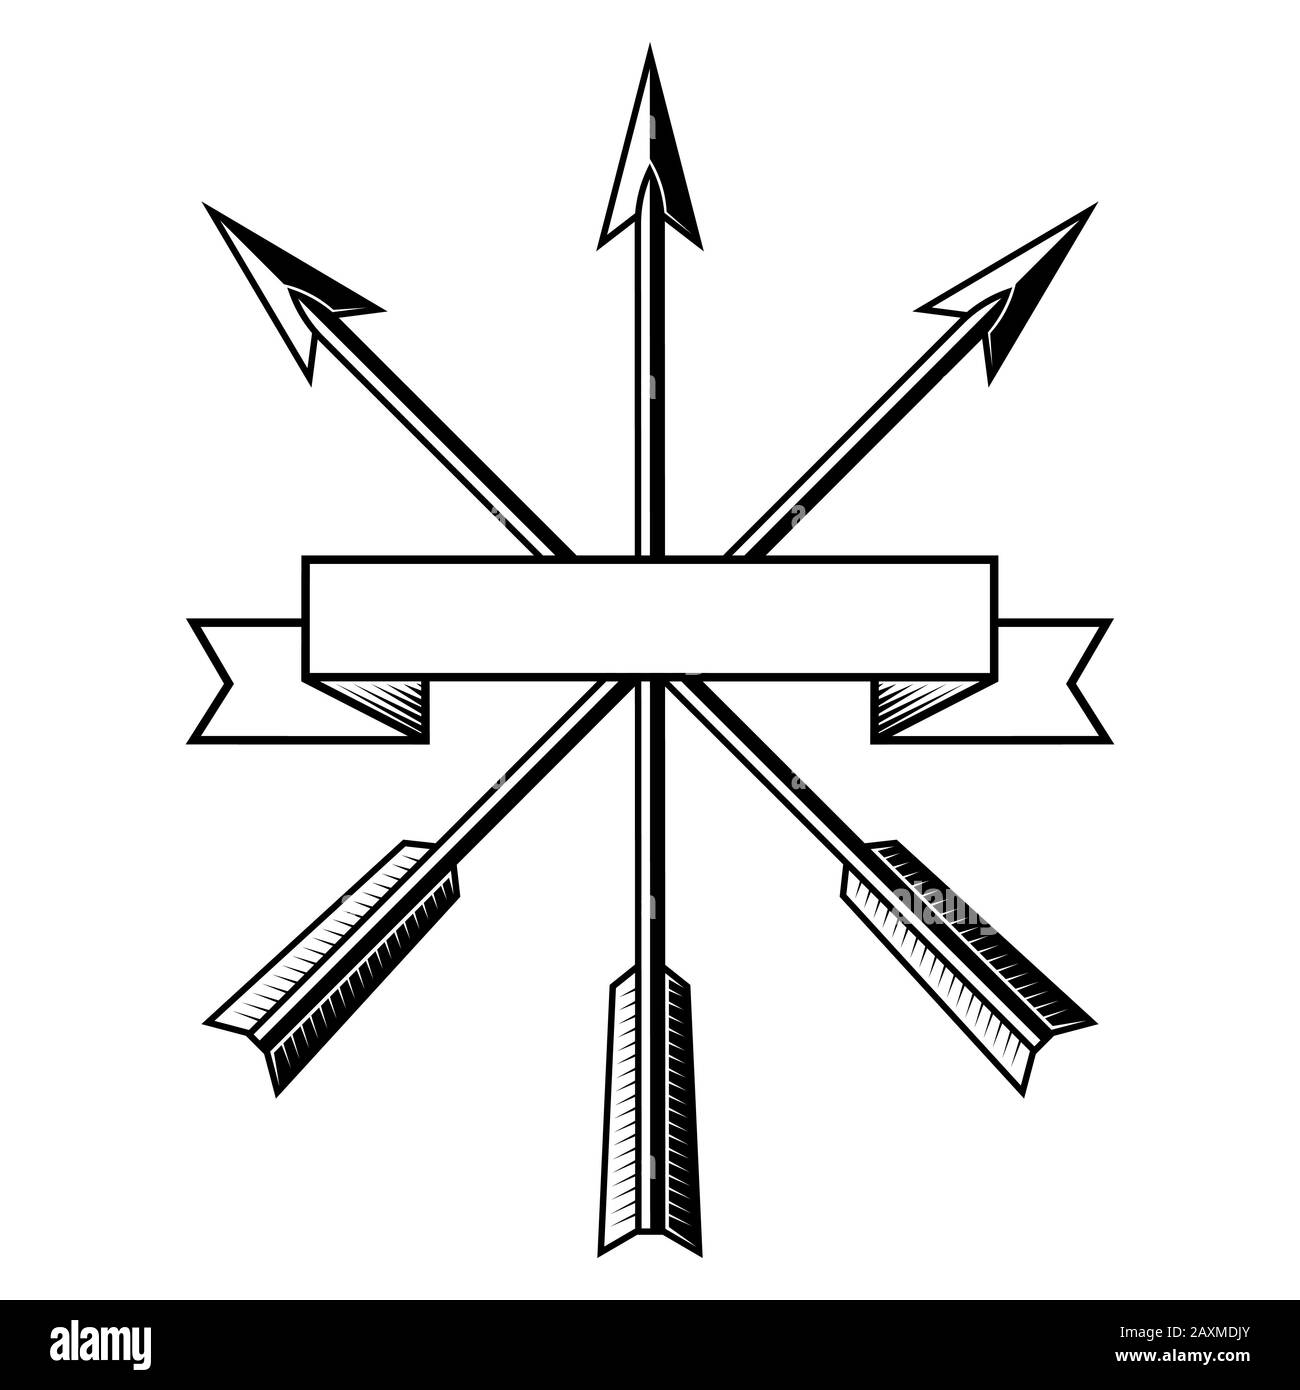 Design with arrows. Arrows of an Archer. A bunch of three vintage arrows and a ribbon Stock Vector